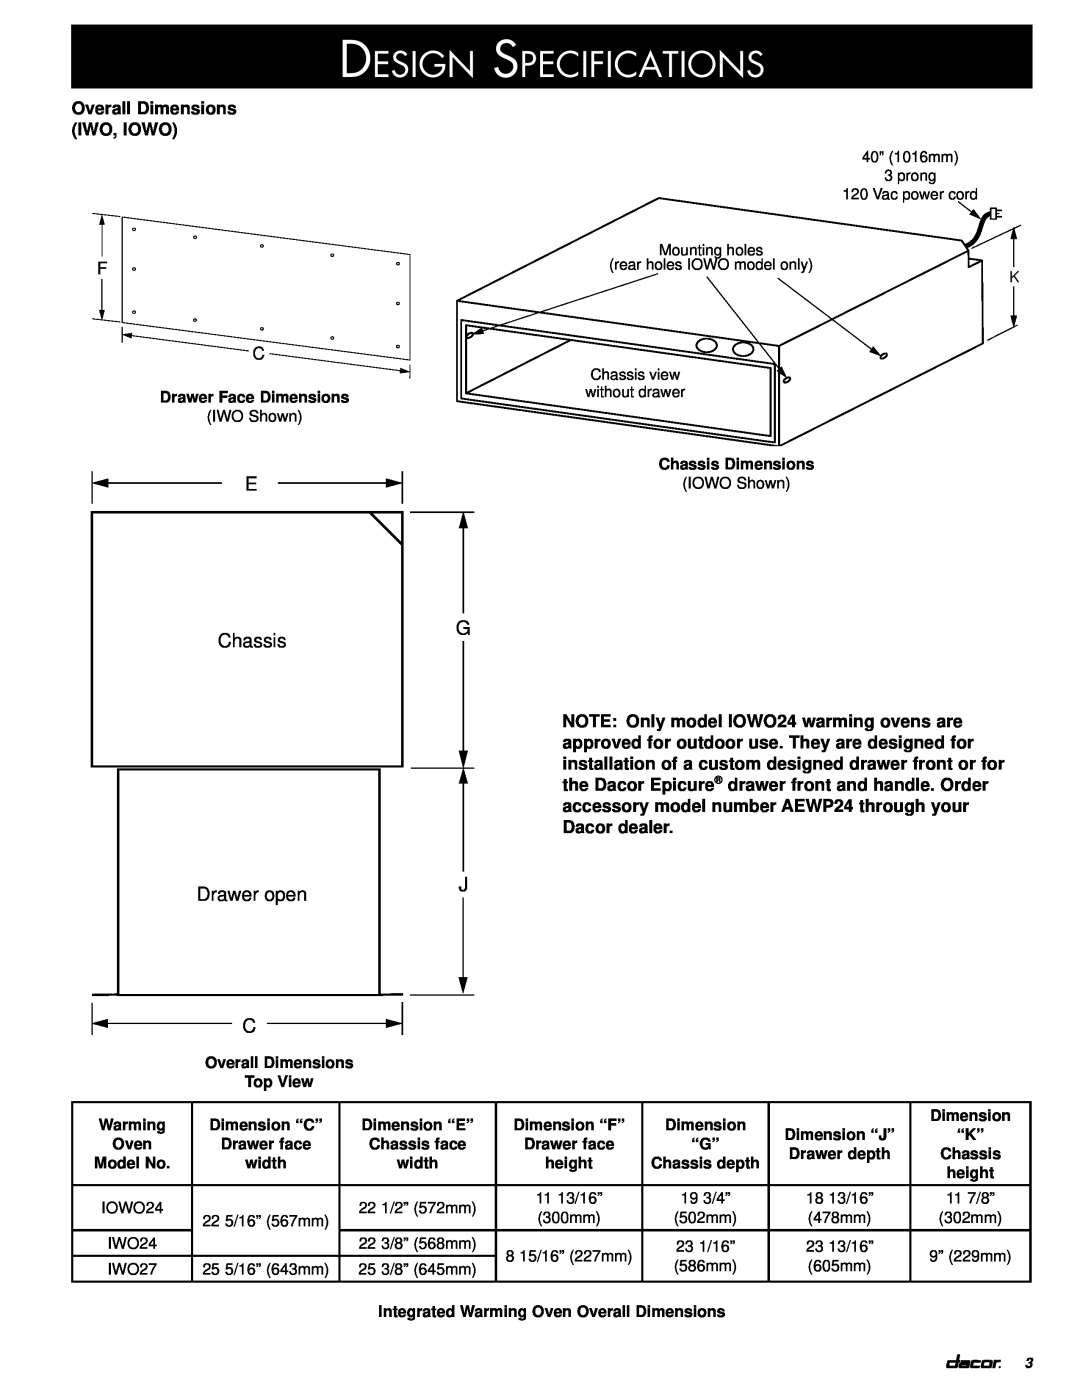 Dacor PWO installation instructions Overall Dimensions IWO, IOWO, Design Specifications, E Chassis Drawer open C 